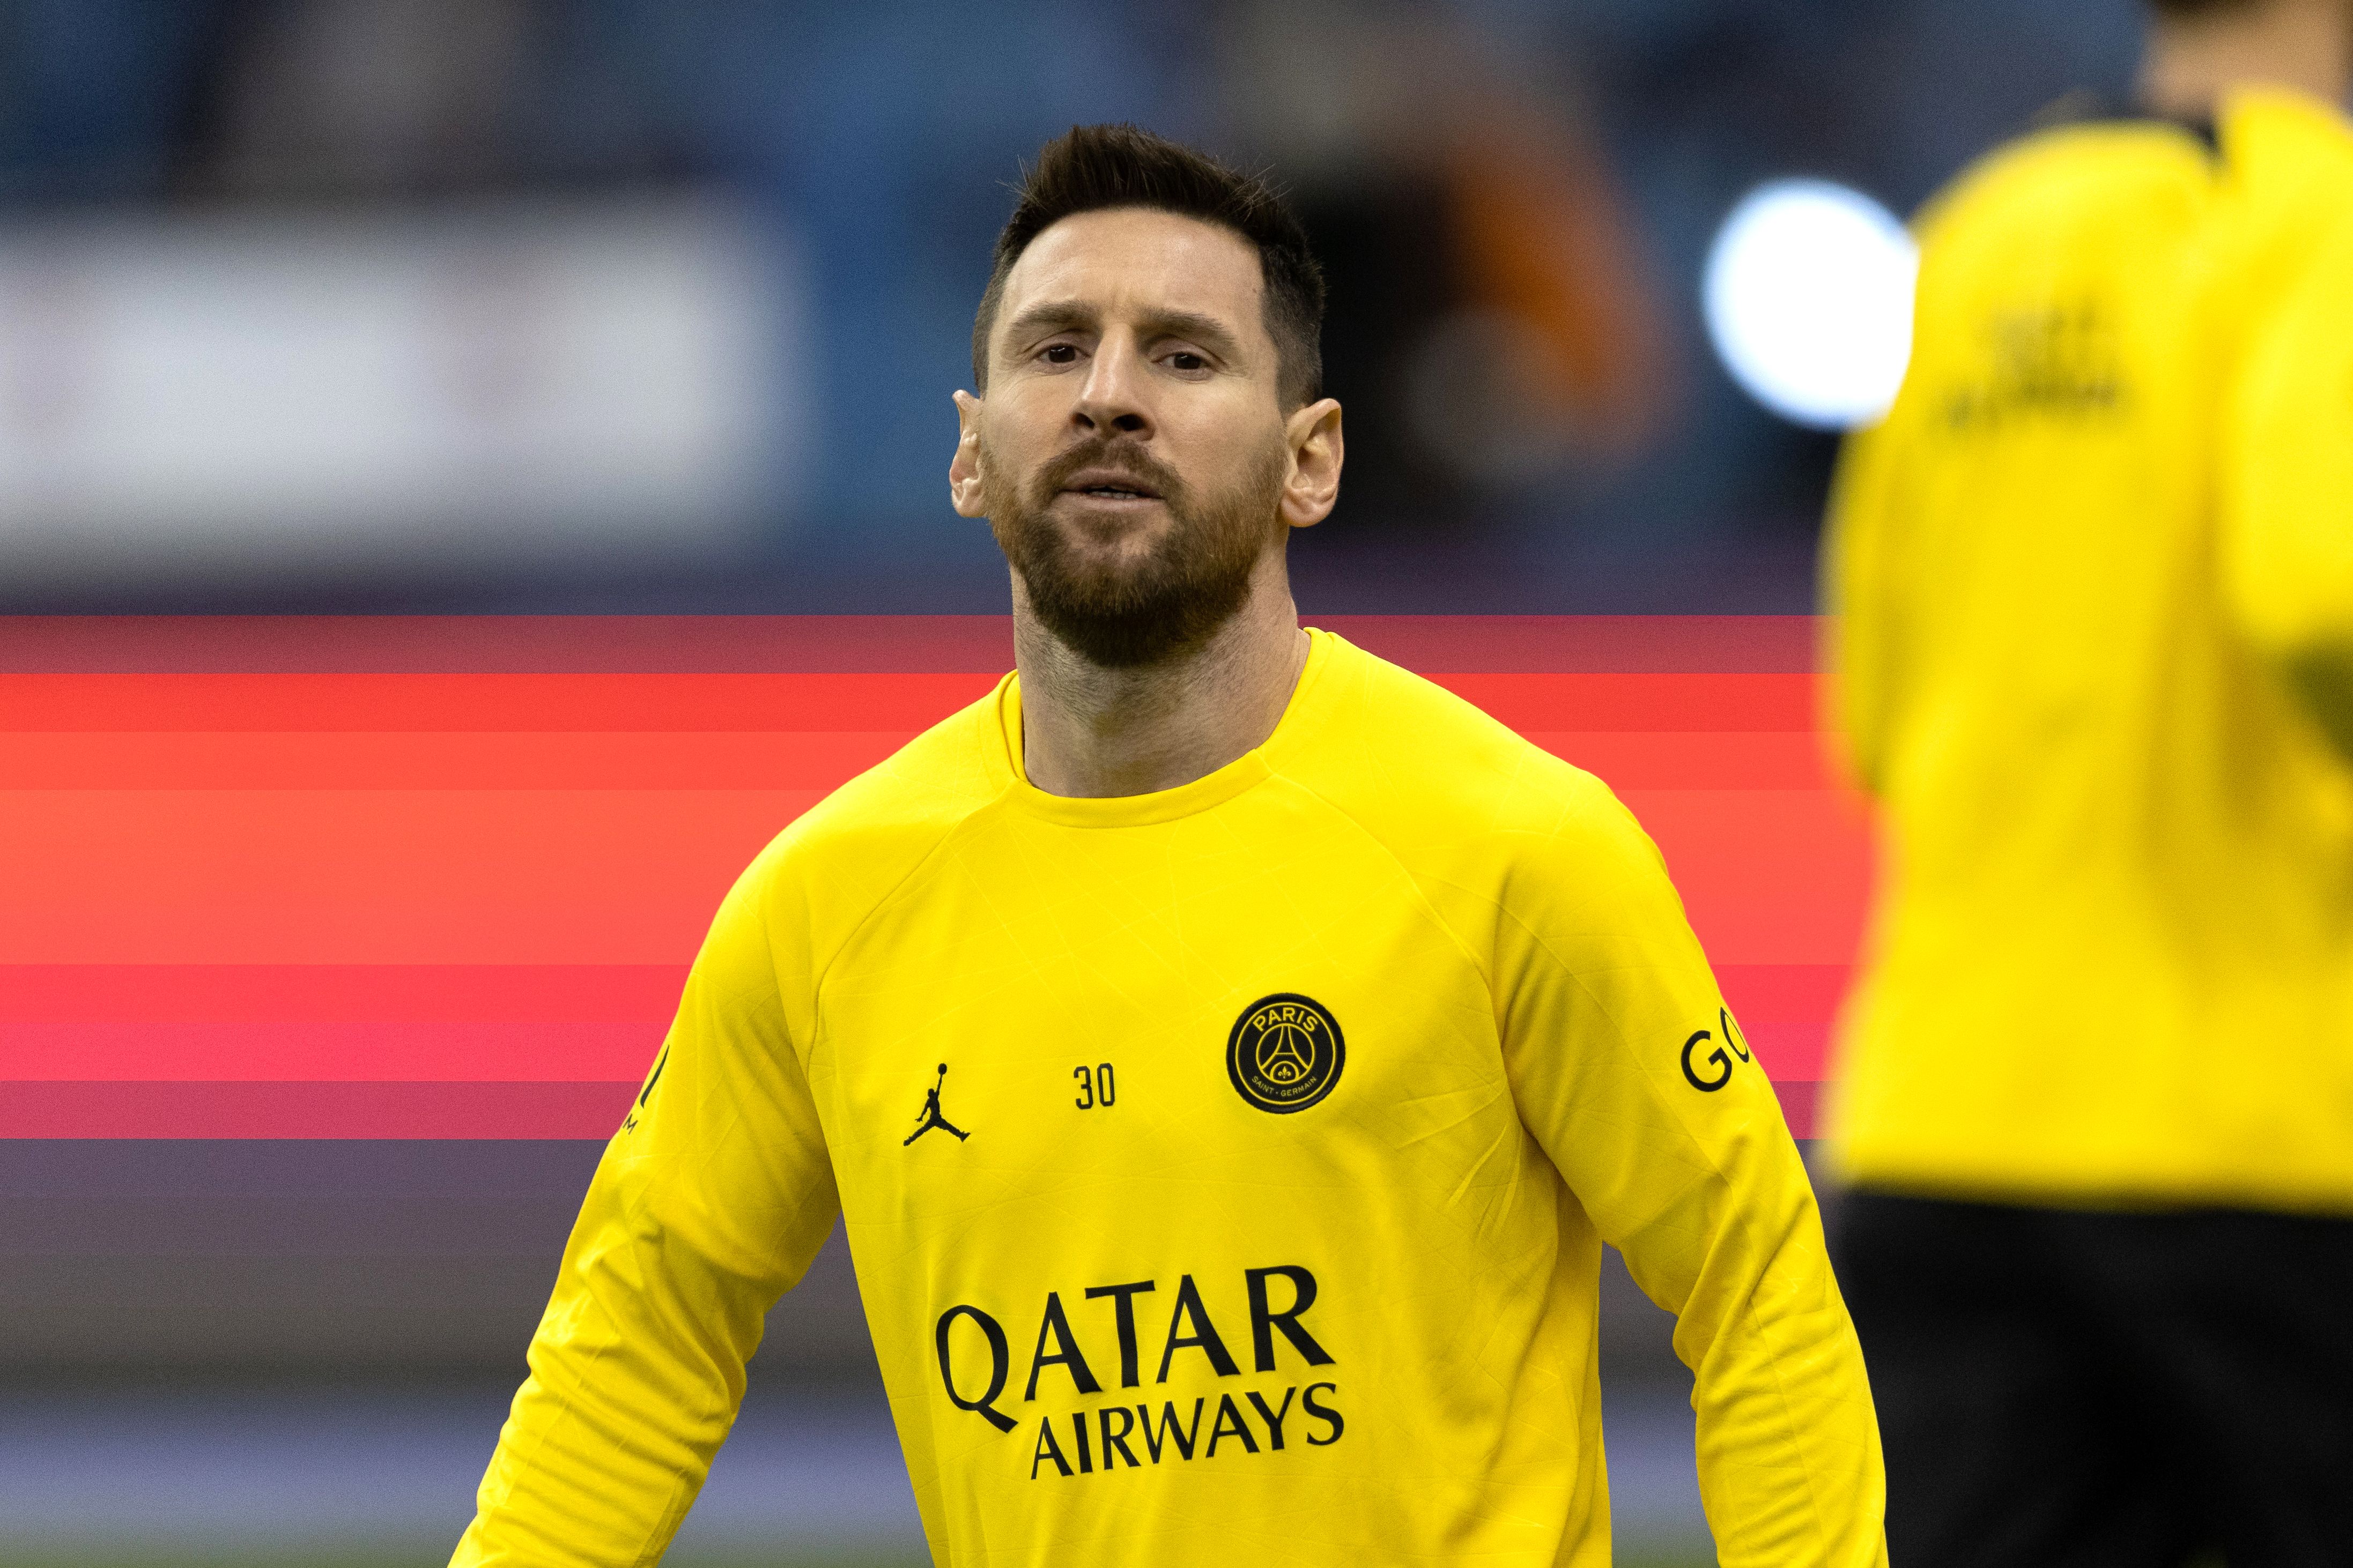 Lionel Messi will be determined to win the Champions League with PSG